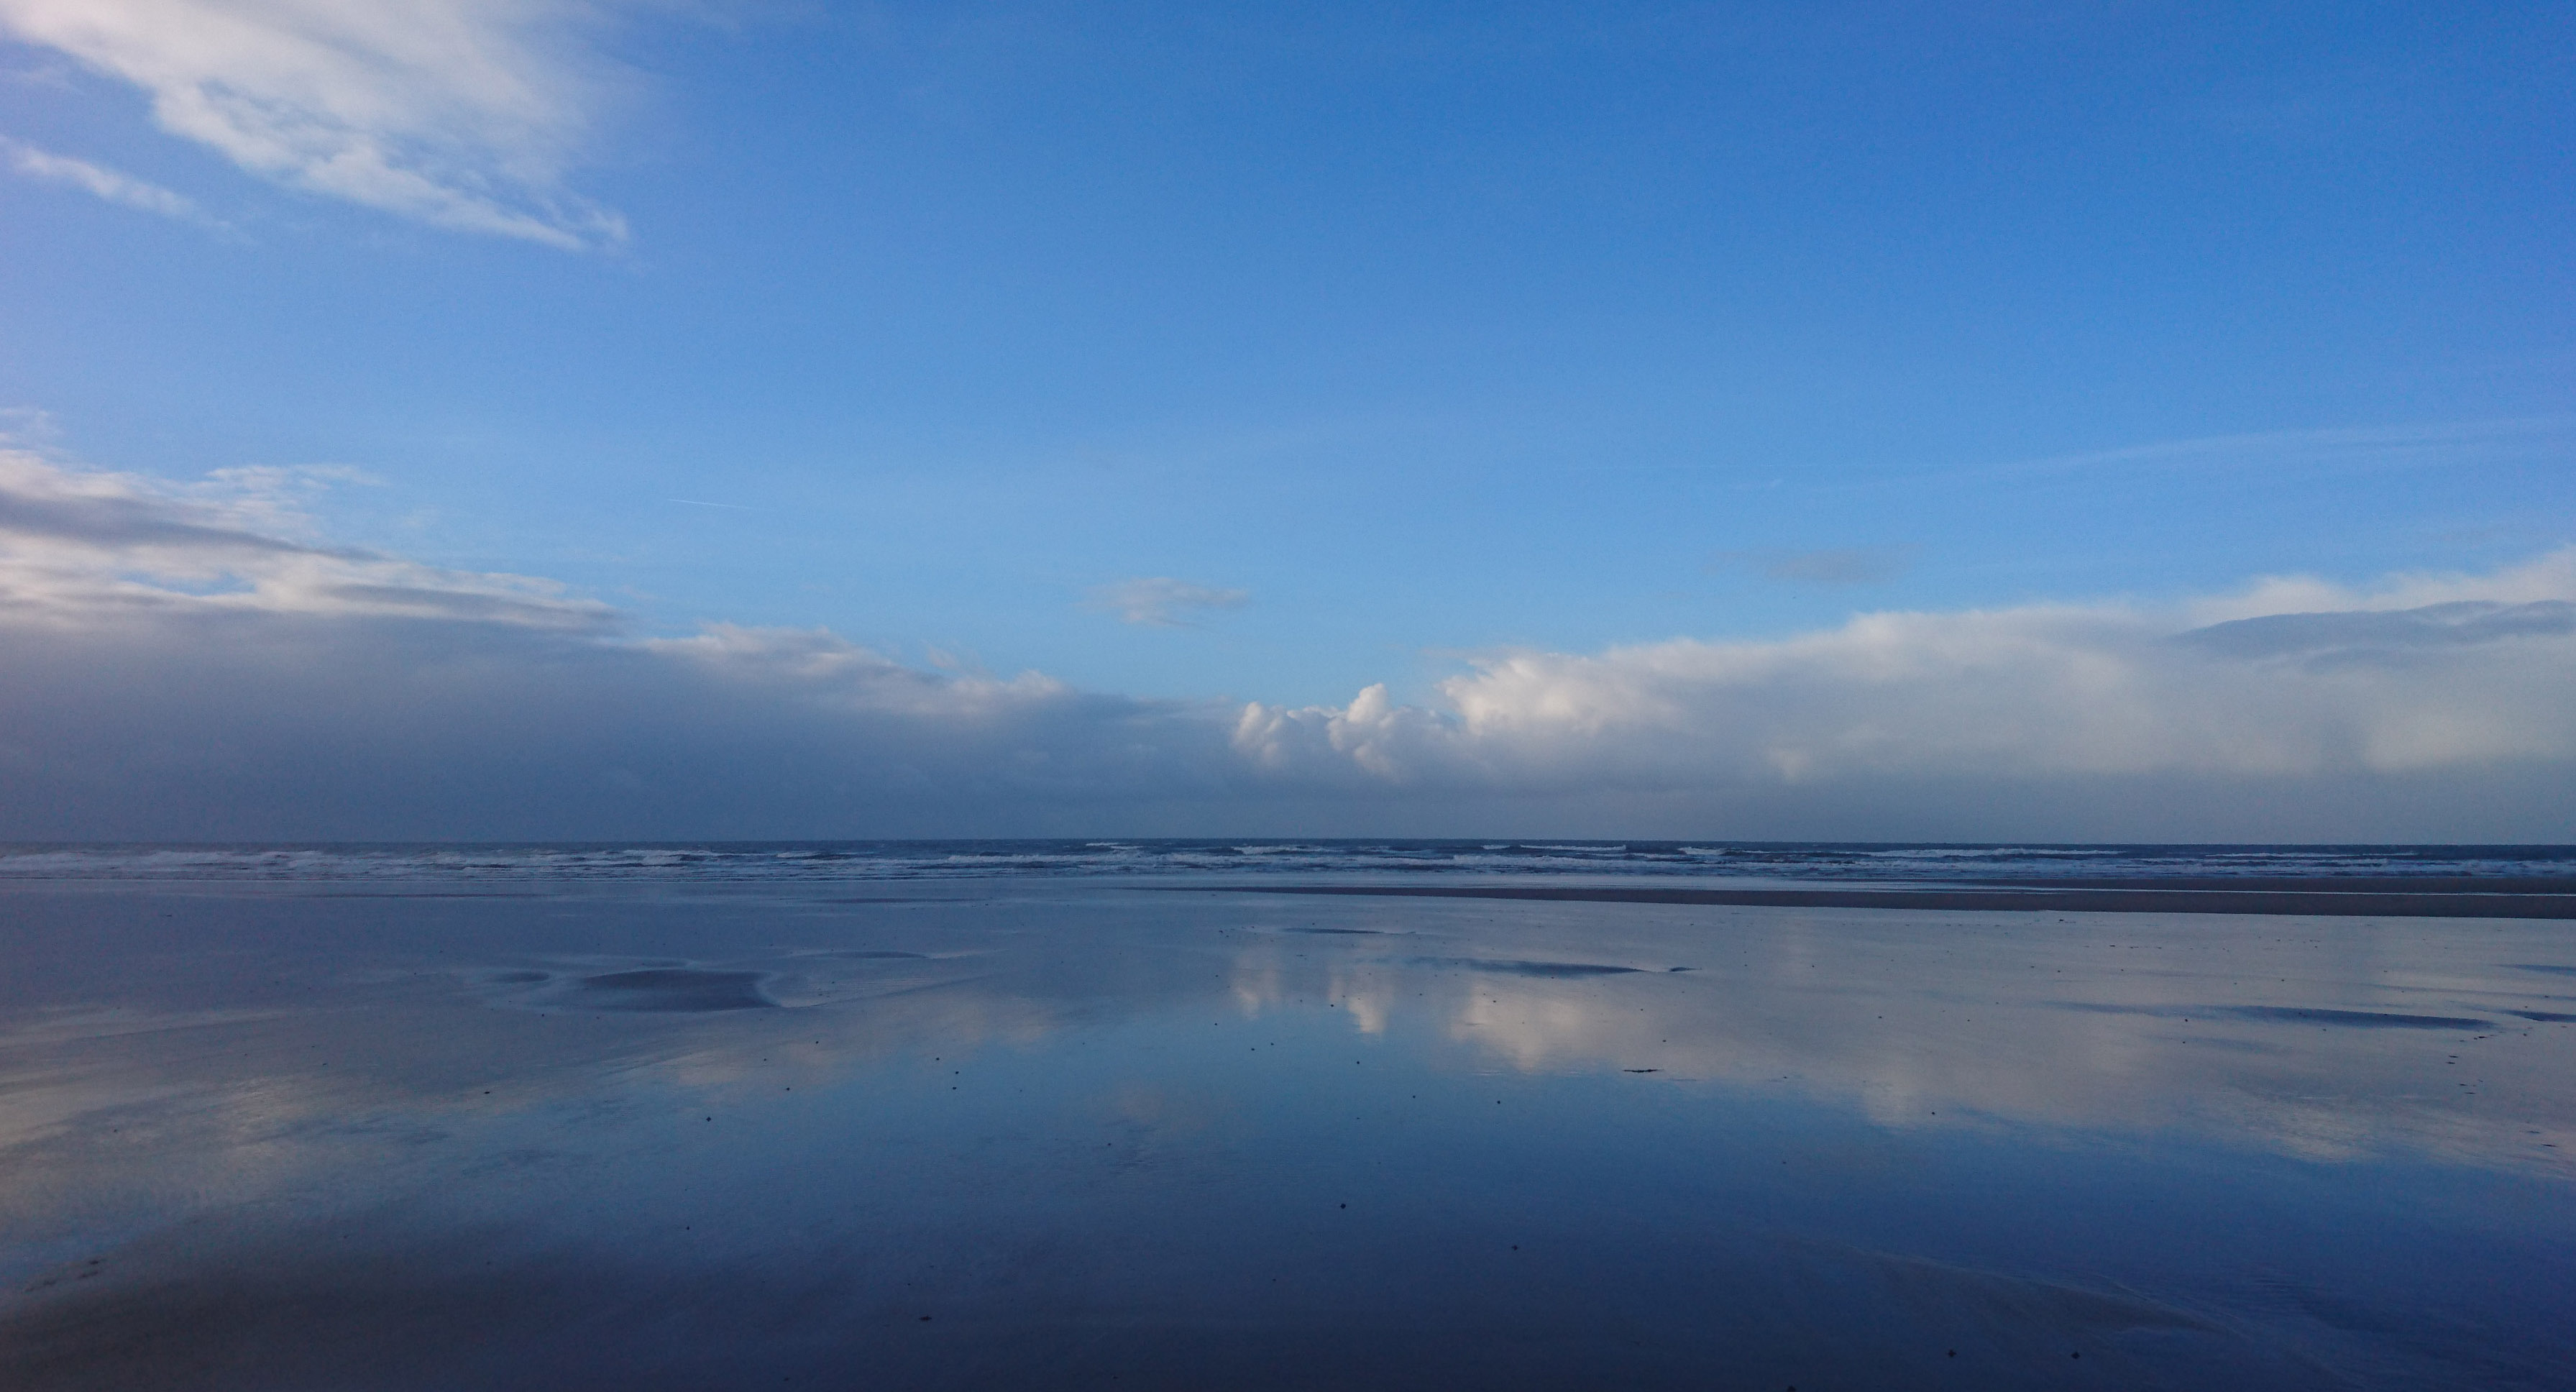 Reflections on St Bees beach